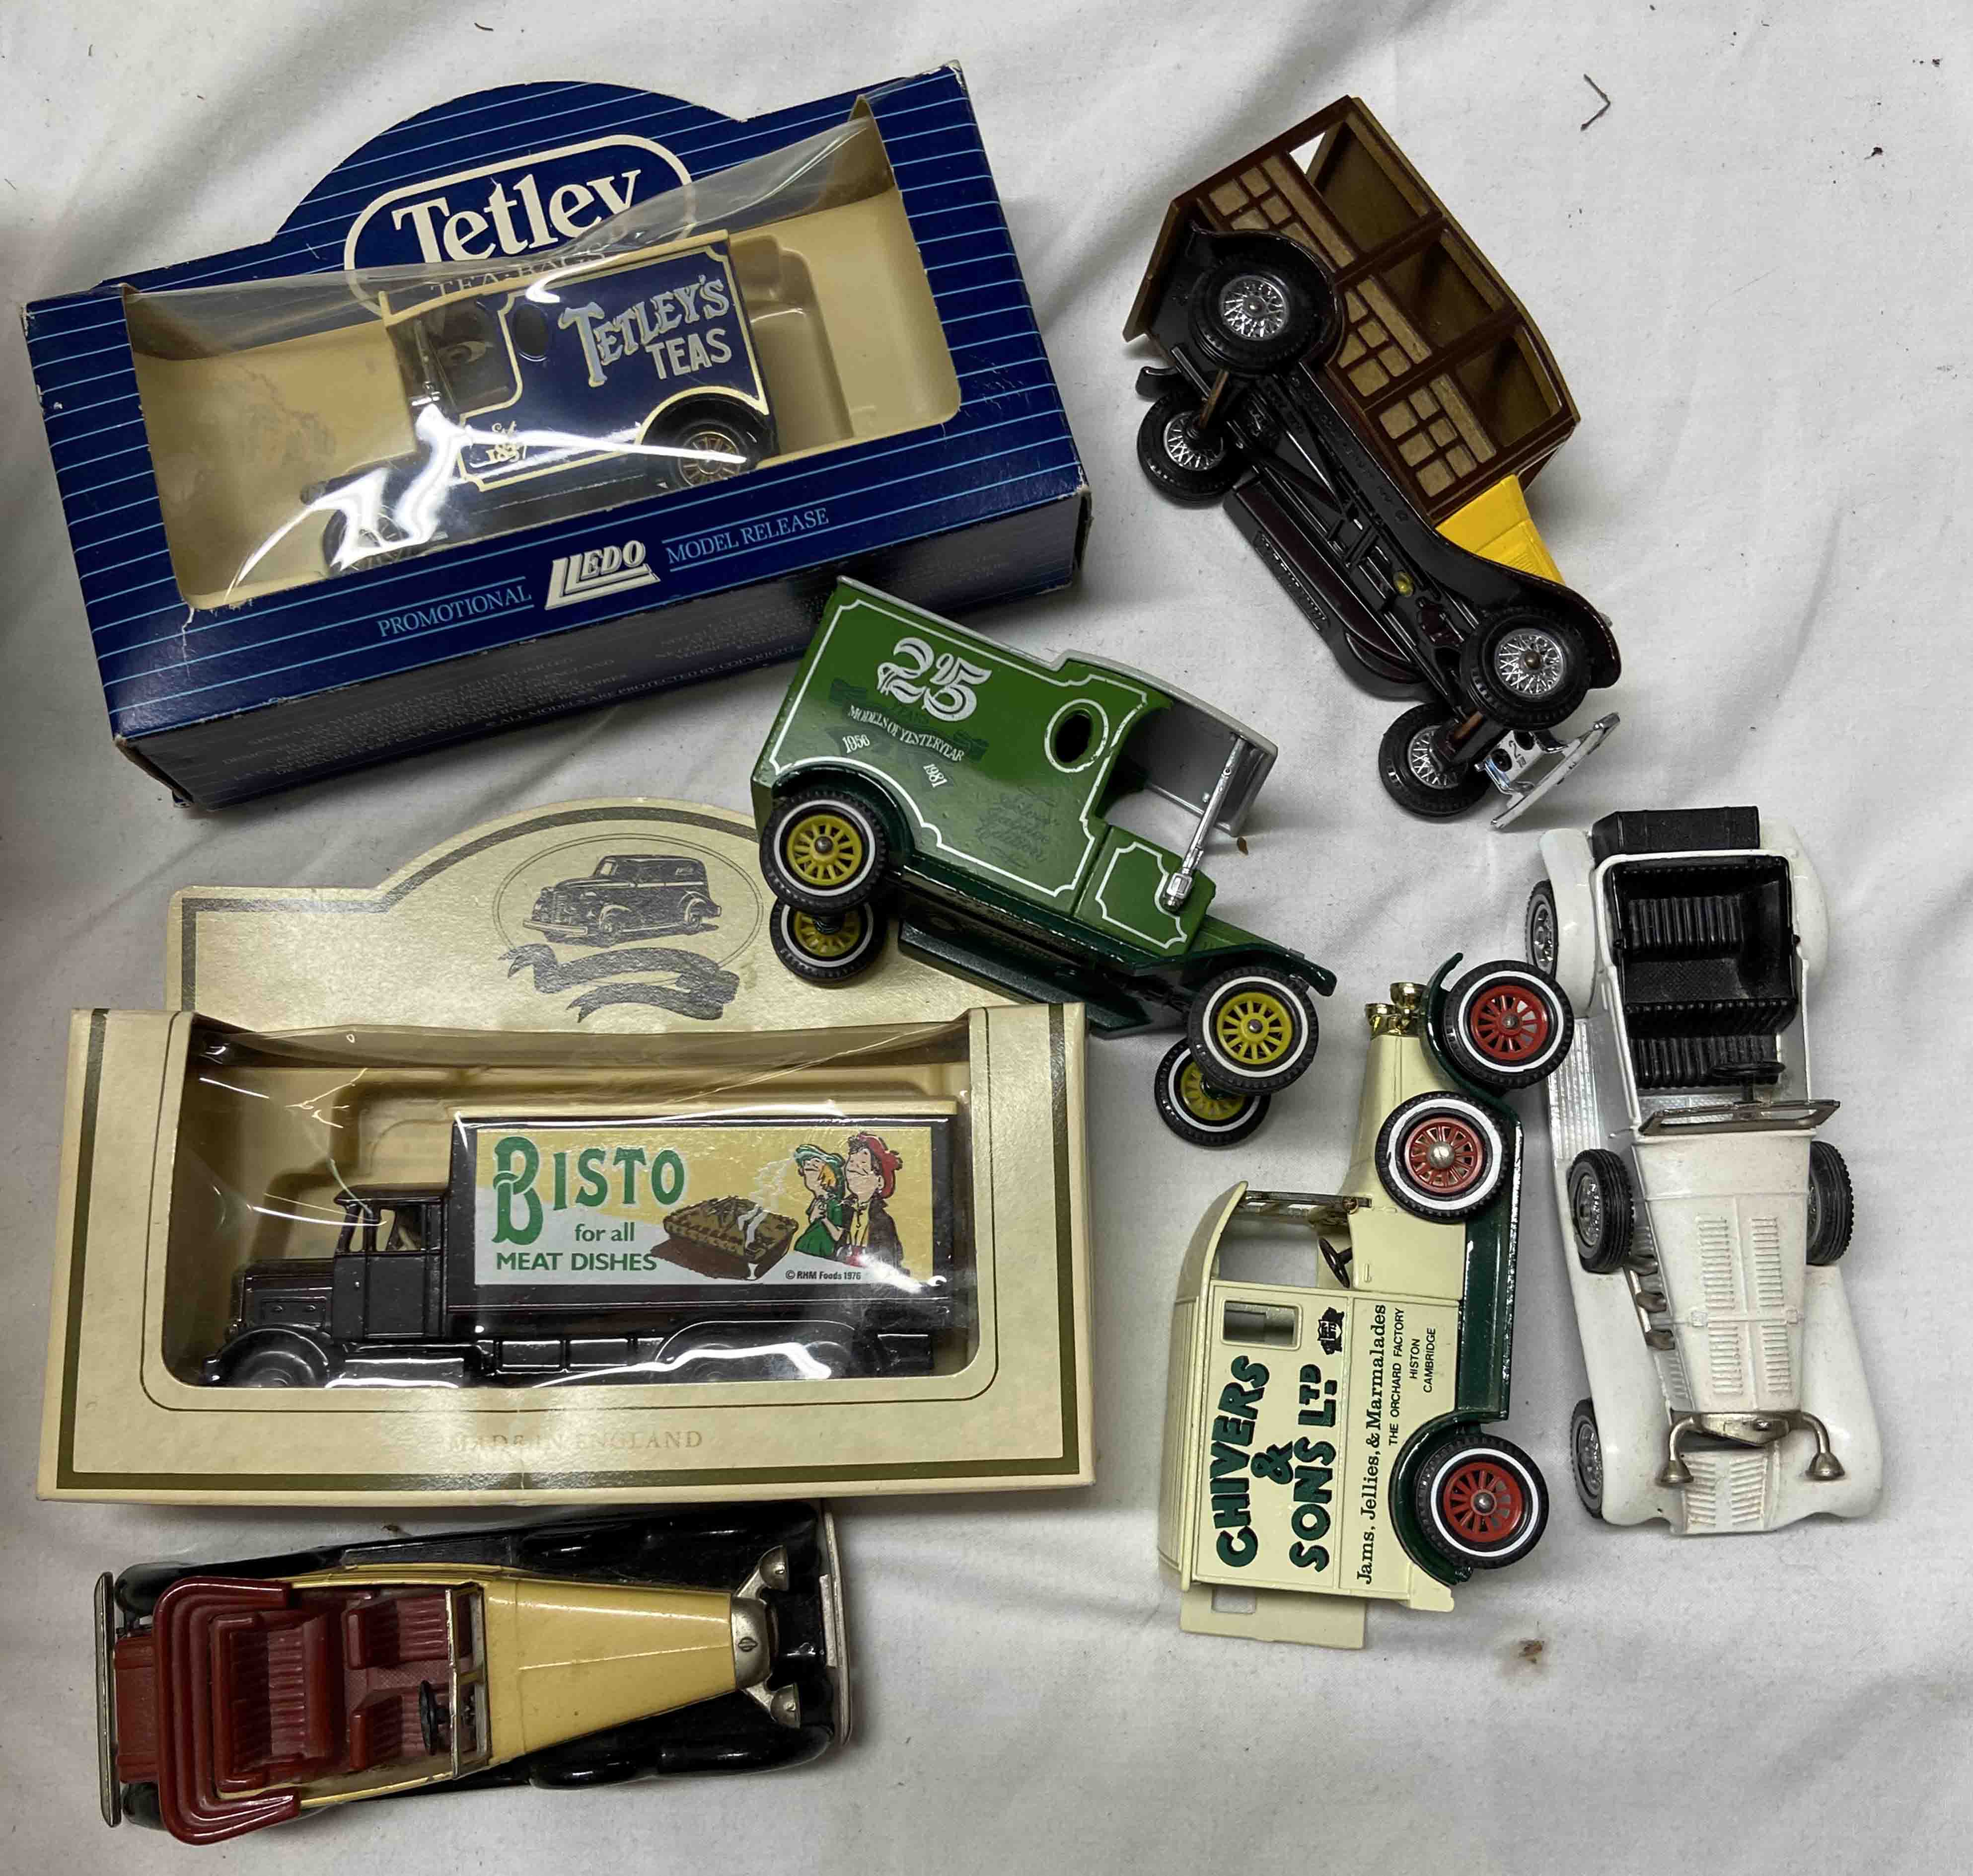 A large quantity of various model cars including Matchbox, Atlas, etc. - sold with a model Vulcan - Image 4 of 7